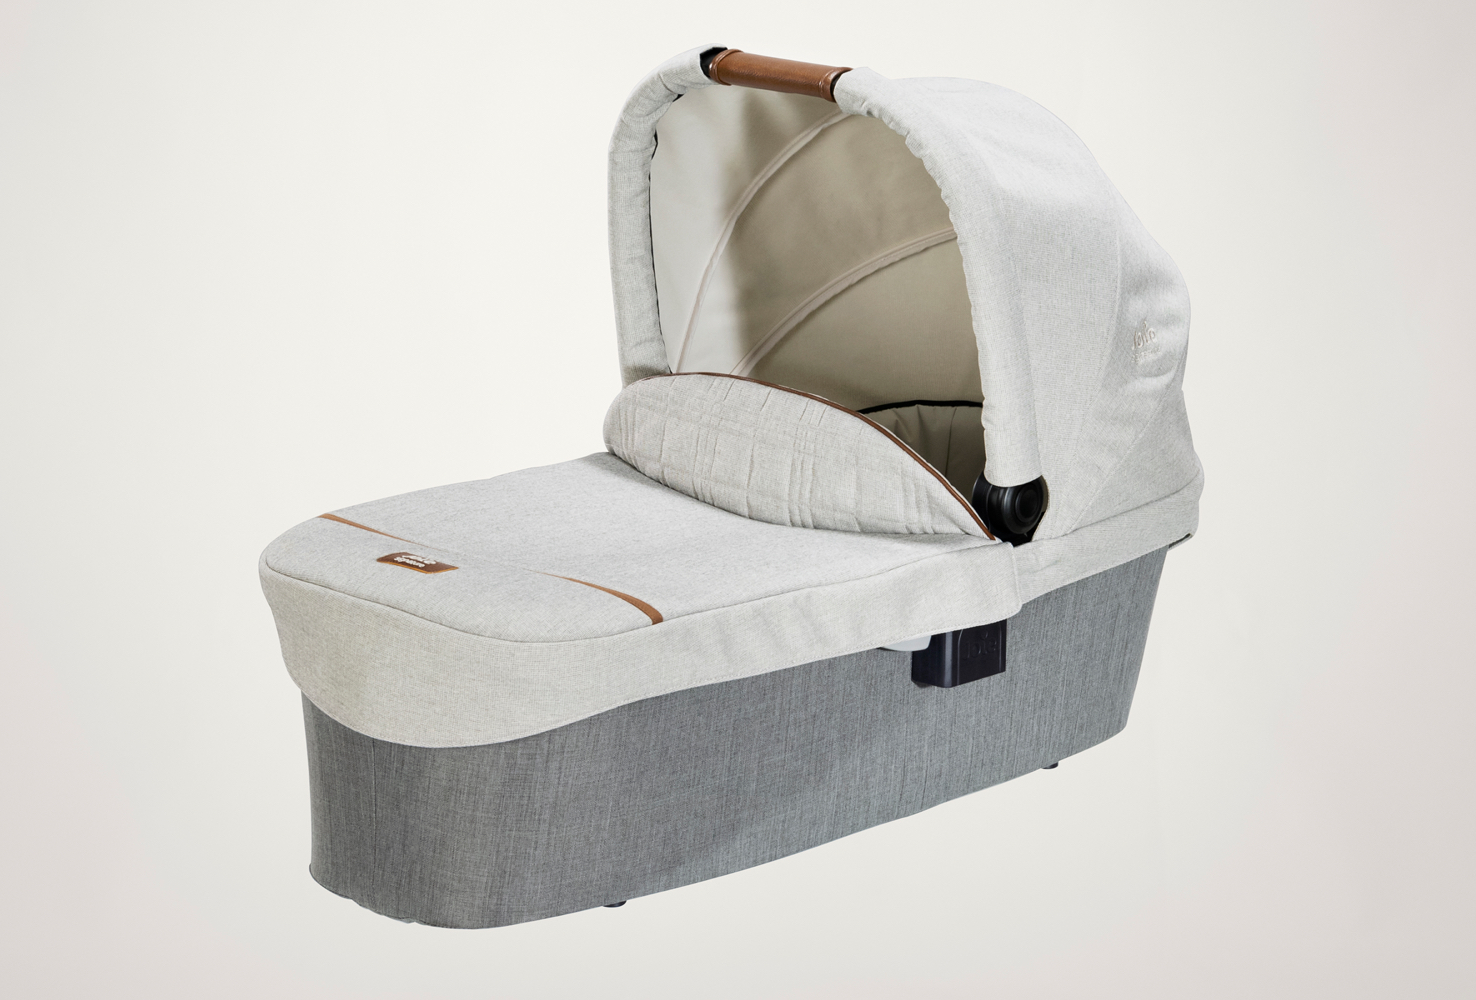 Gray Joie Signature Ramble carry cot facing toward the left at an angle. 